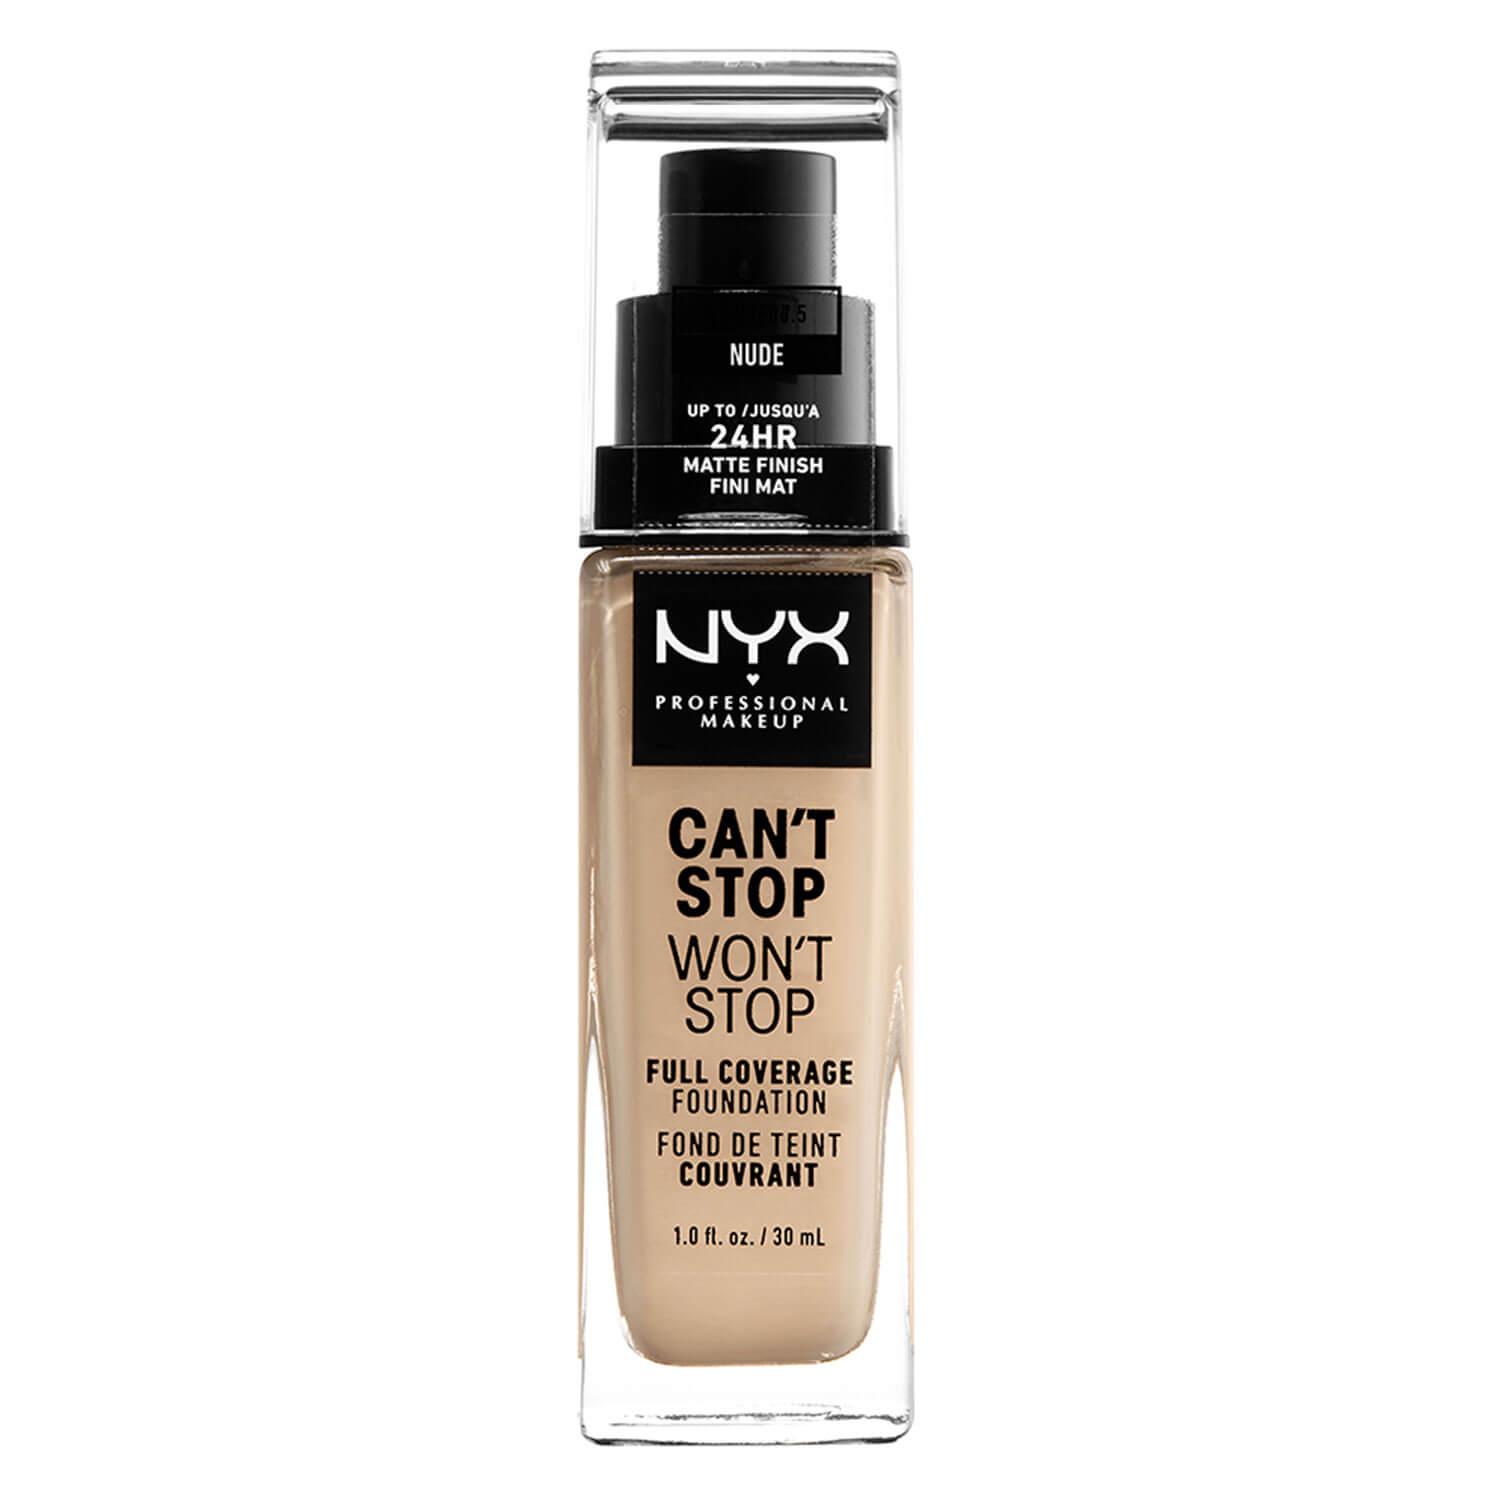 Can't Stop Won't Stop - Full Coverage Foundation Nude